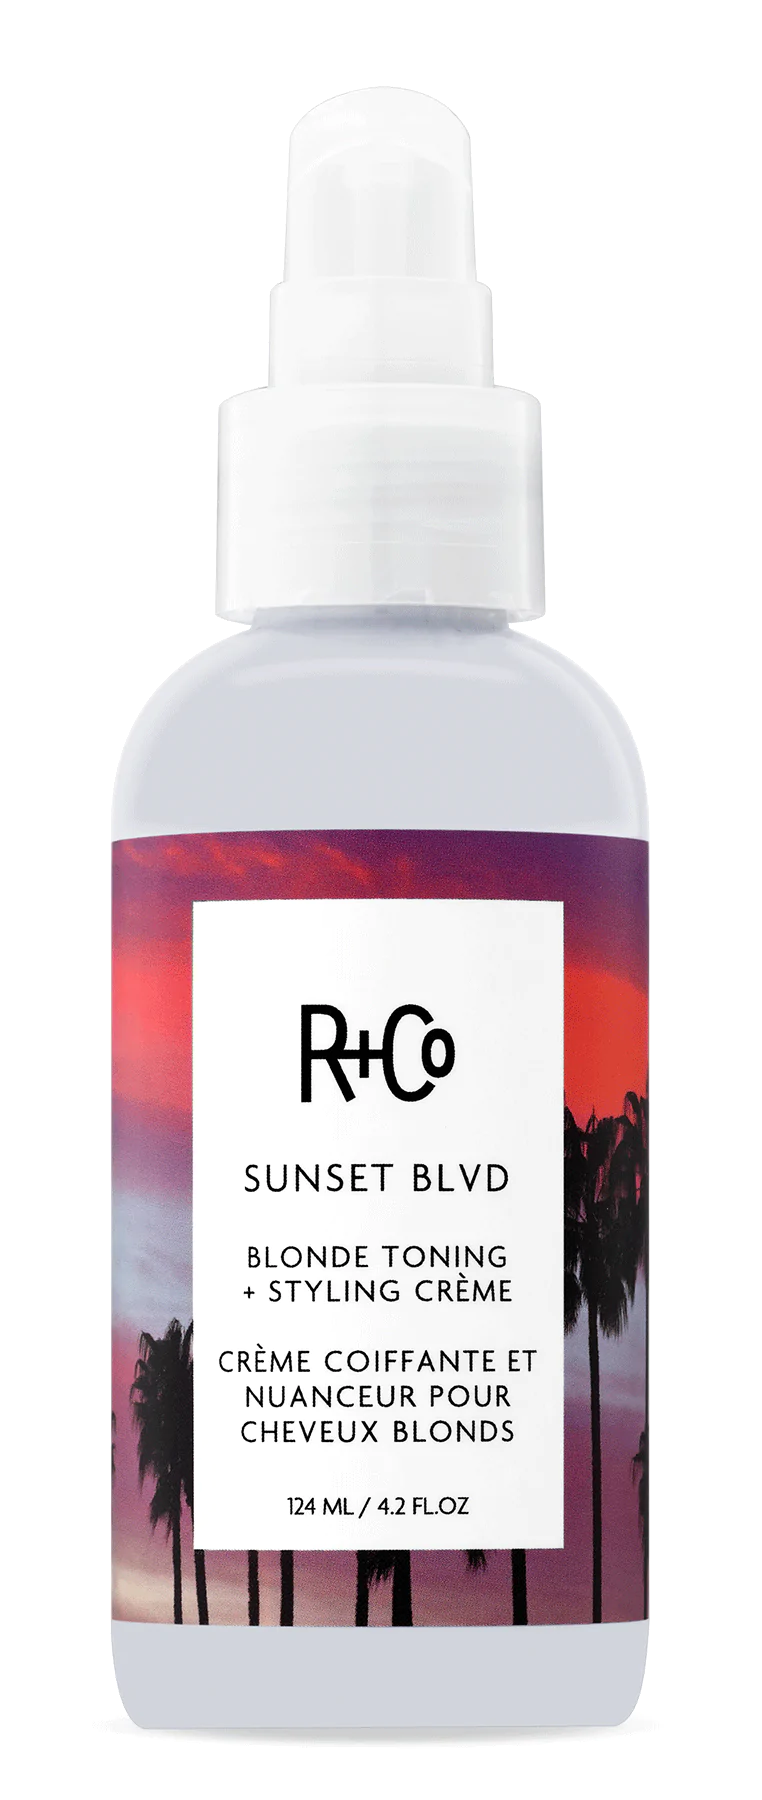 R+CO Sunset Blvd Blonde Toning Styling Creme - Totality Medispa and Skincare